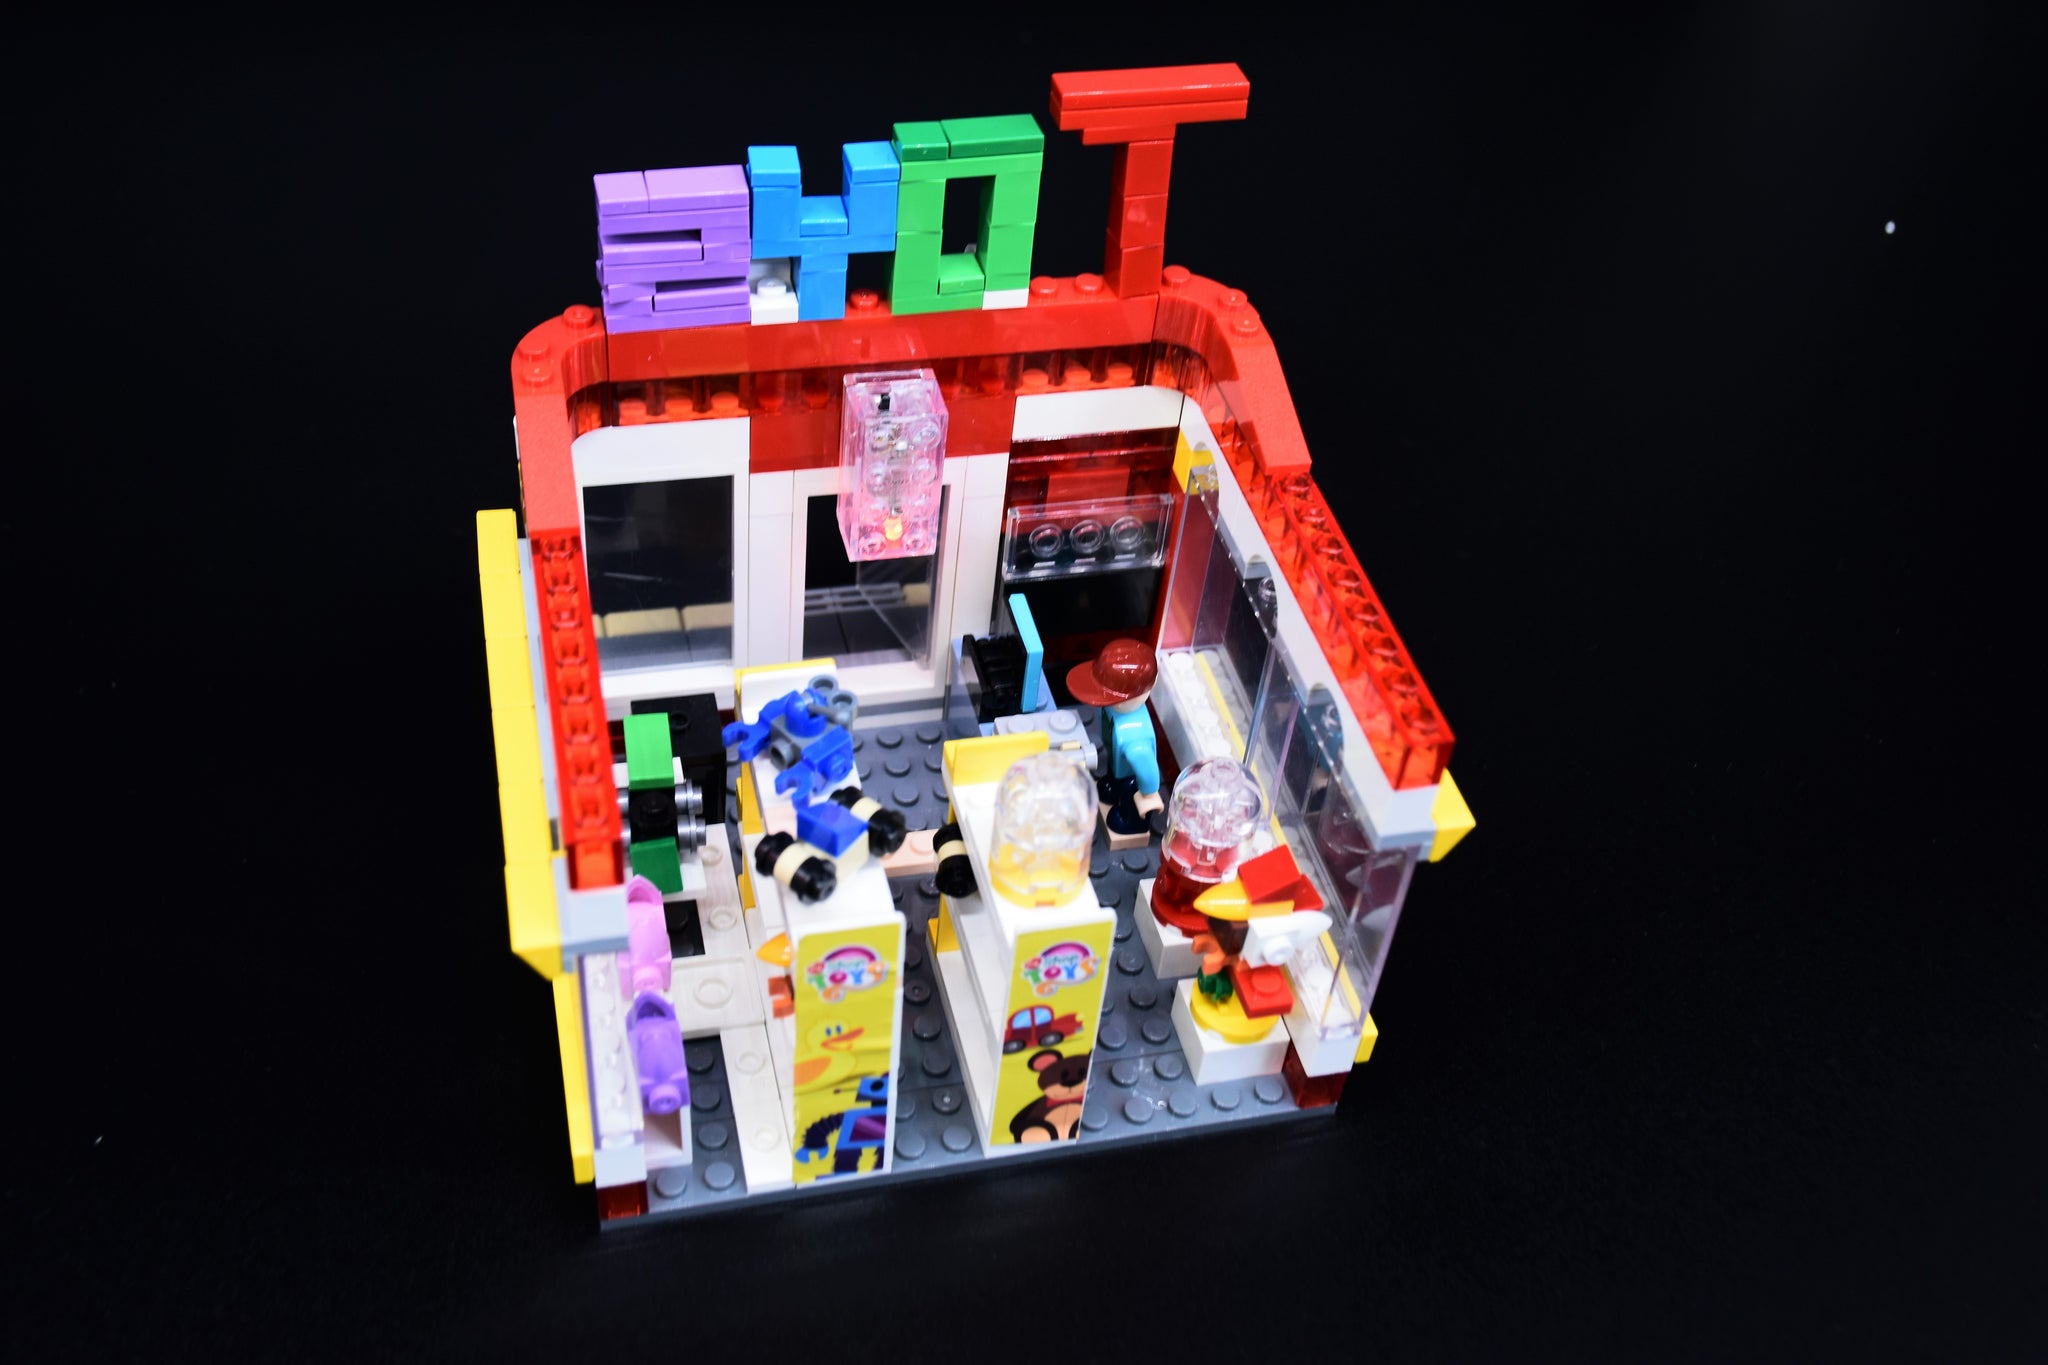 Toy Store Building Block Set with LED Lightbox (410 Pieces)